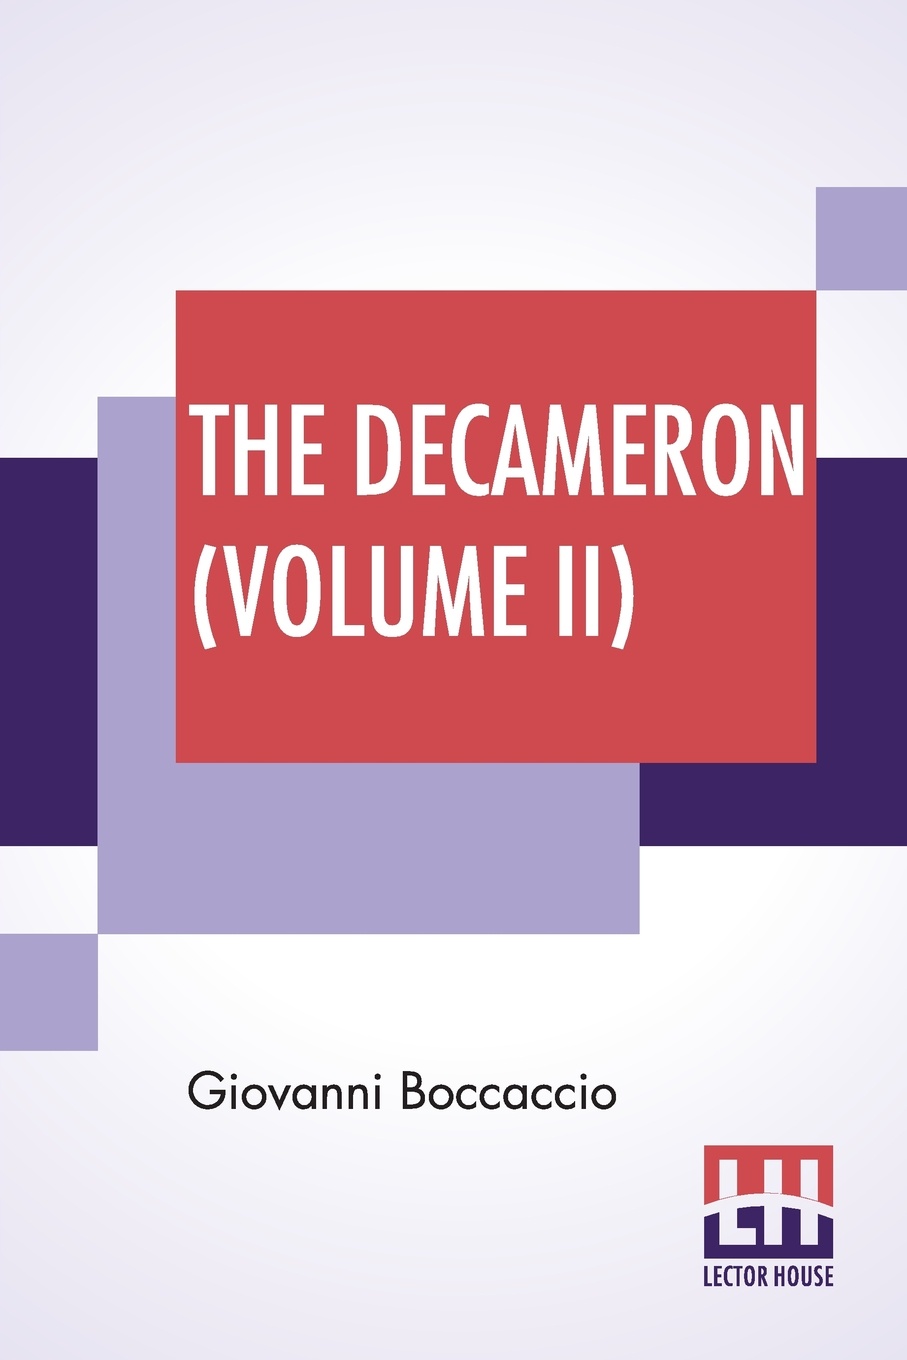 The Decameron (Volume II). Containing An Hundred Pleasant Novels. Wittily Discoursed, Betweene Seaven Honourable Ladies, And Three Noble Gentlemen (Day VI To Day X), Translated By John Florio